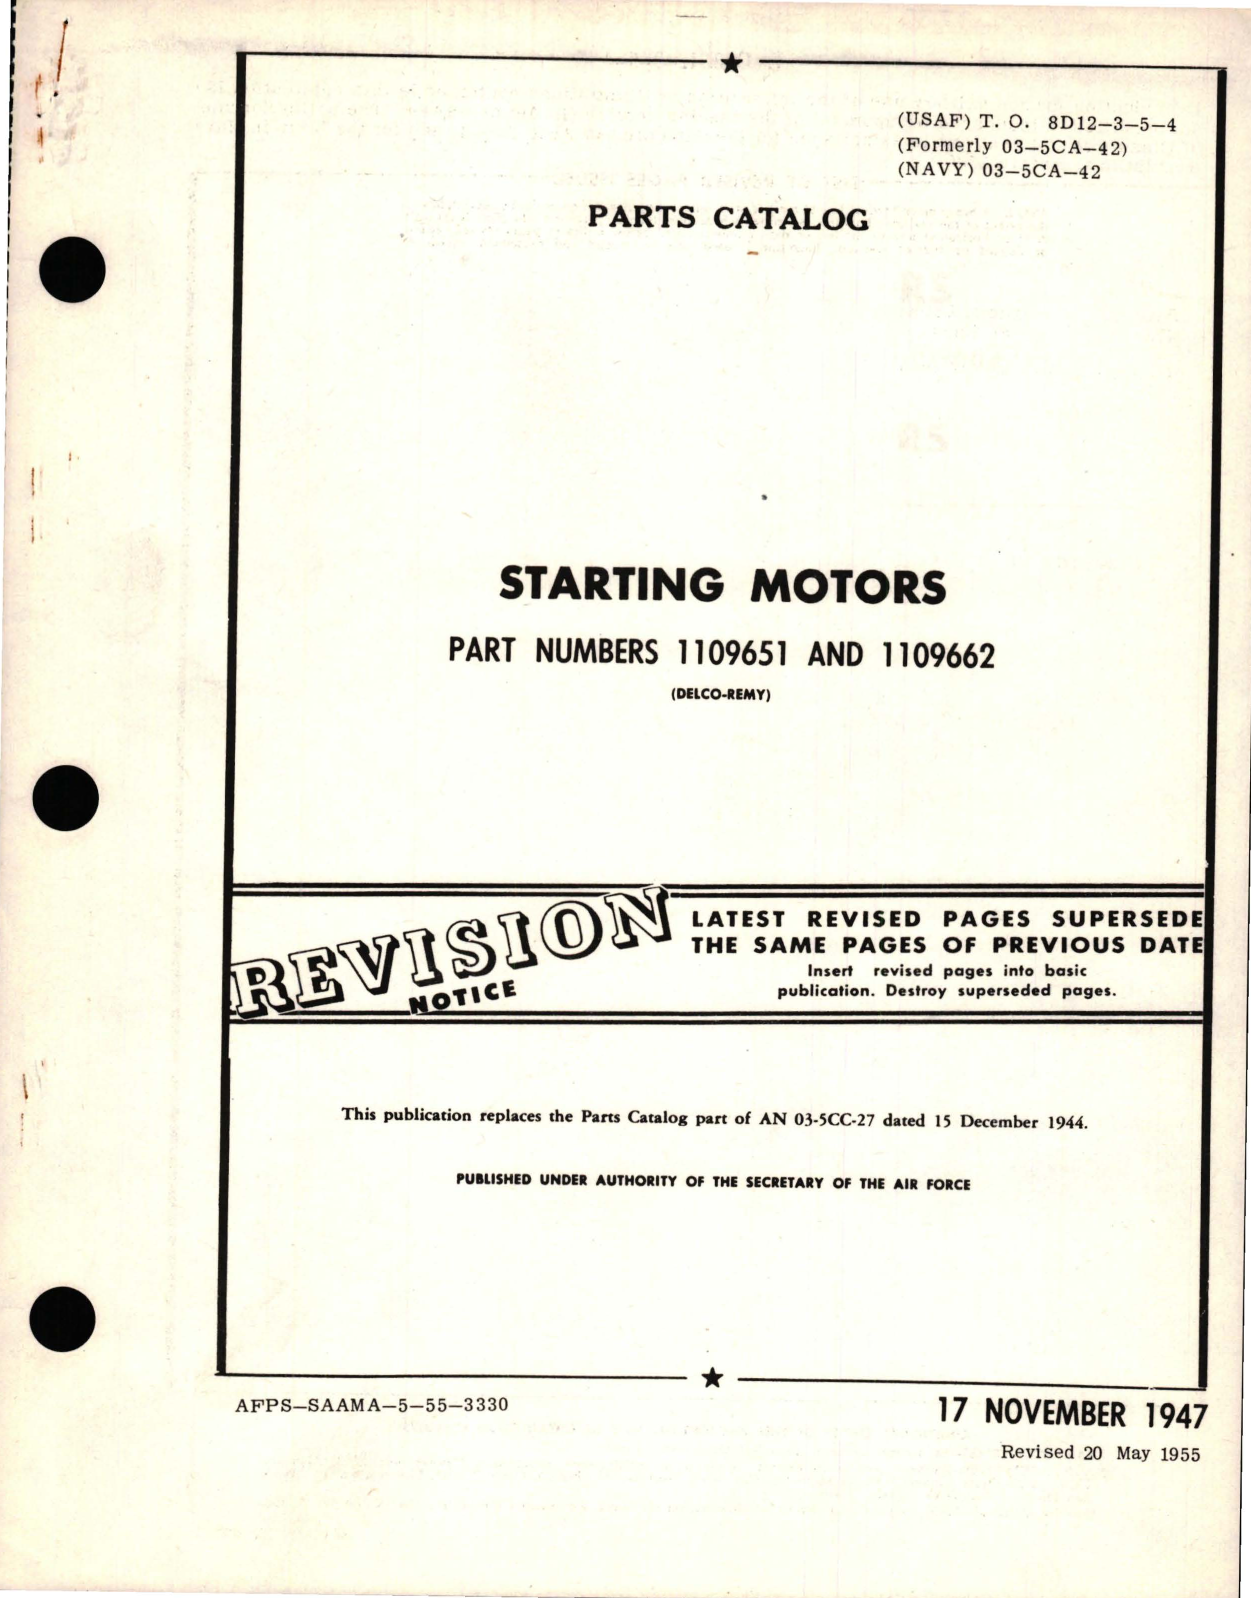 Sample page 1 from AirCorps Library document: Parts Catalog for Starting Motors - Parts 1109651 and 1109662